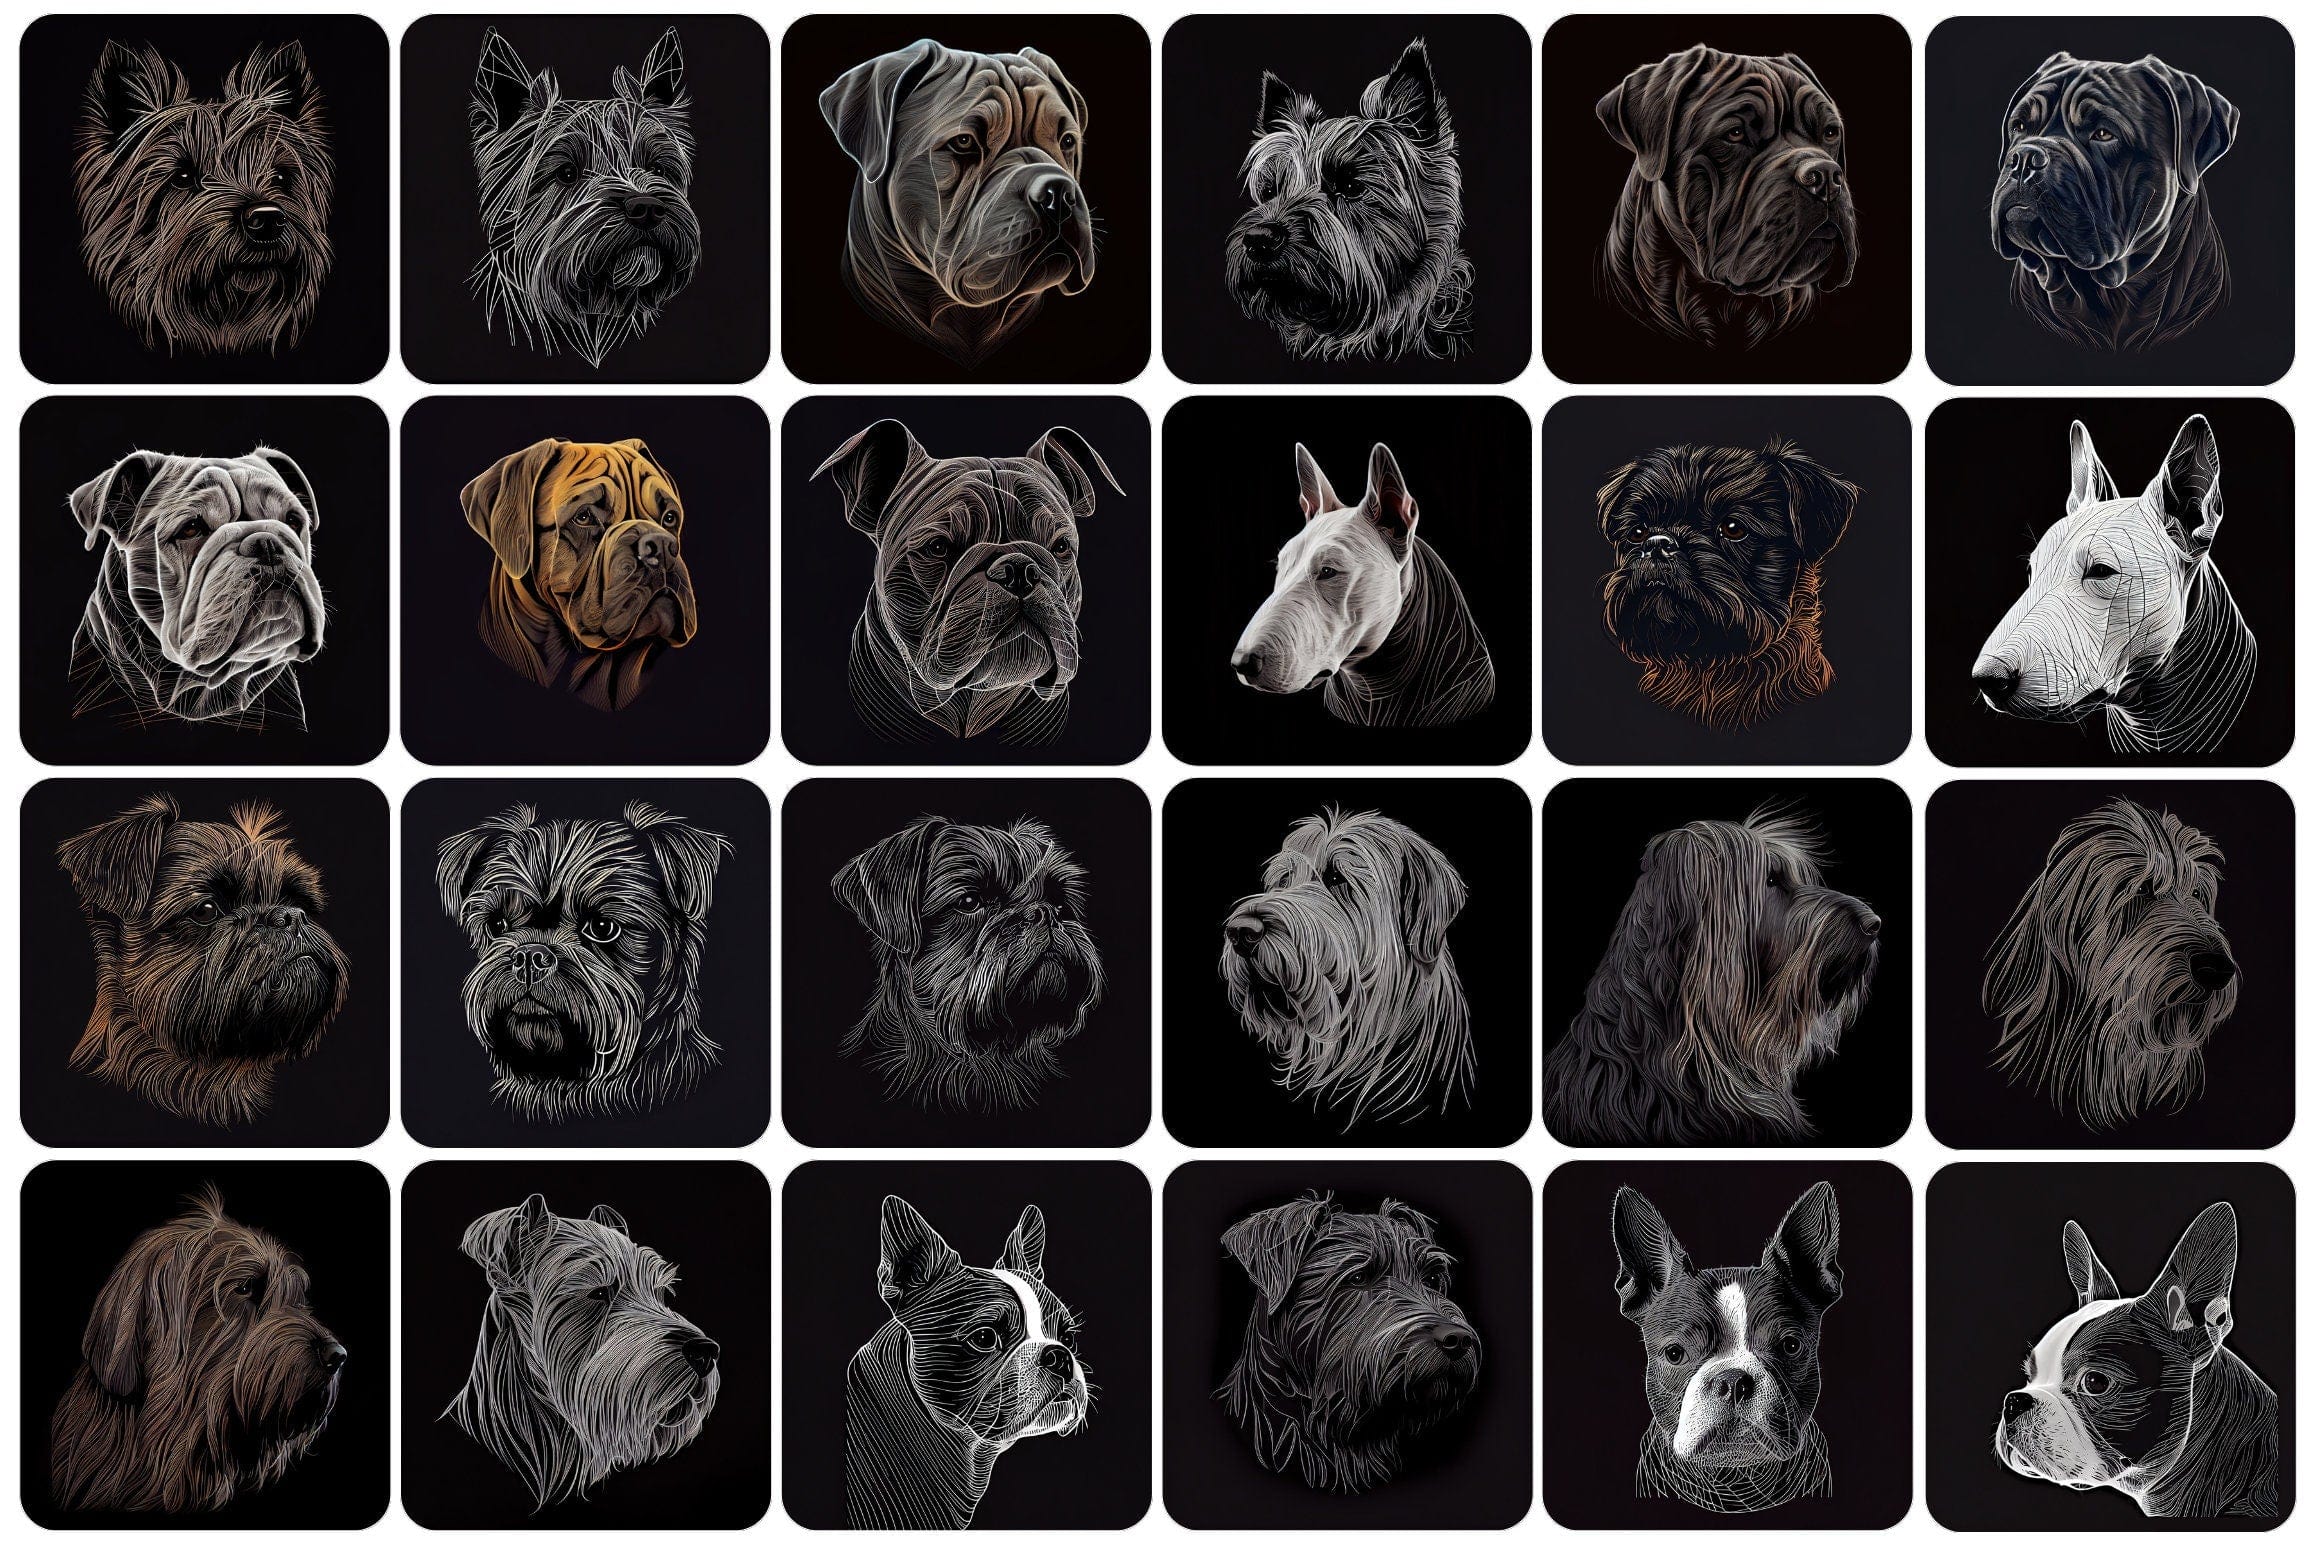 Download 600 Elegant Images with Dogs, Discover the World of Dogs with 600 Breeds Bundle - Perfect Gift for Dog Lovers, Breeders, and Owners Digital Download Sumobundle